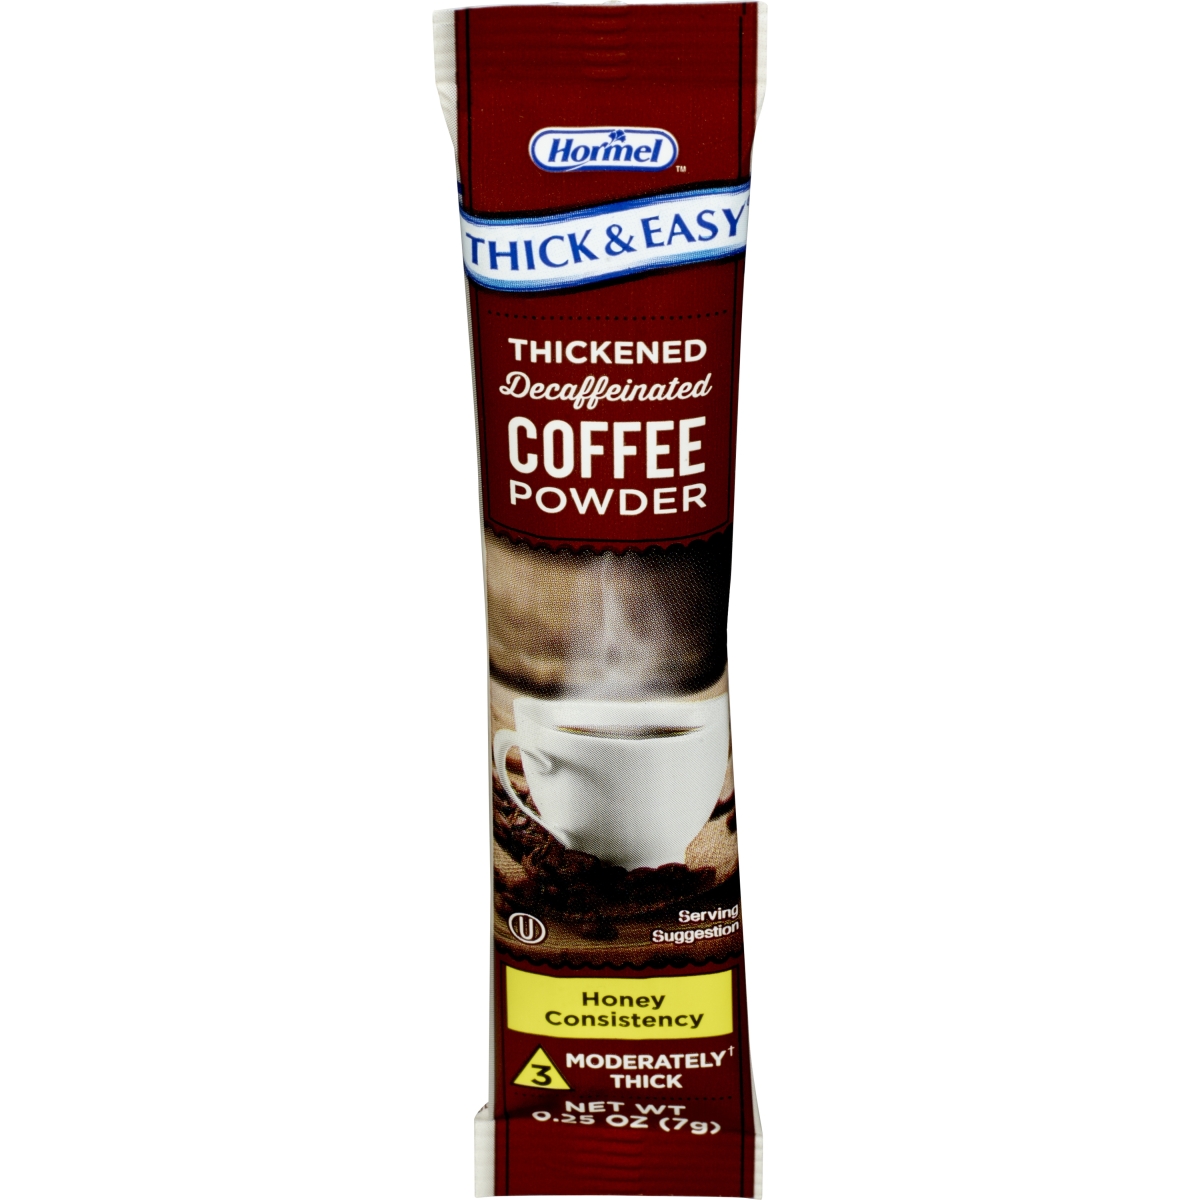 Picture of Hormel Food Sales 81272601 7 g Honey Consistency Coffee Thick & Easy Thickened Decaffeinated Beverage